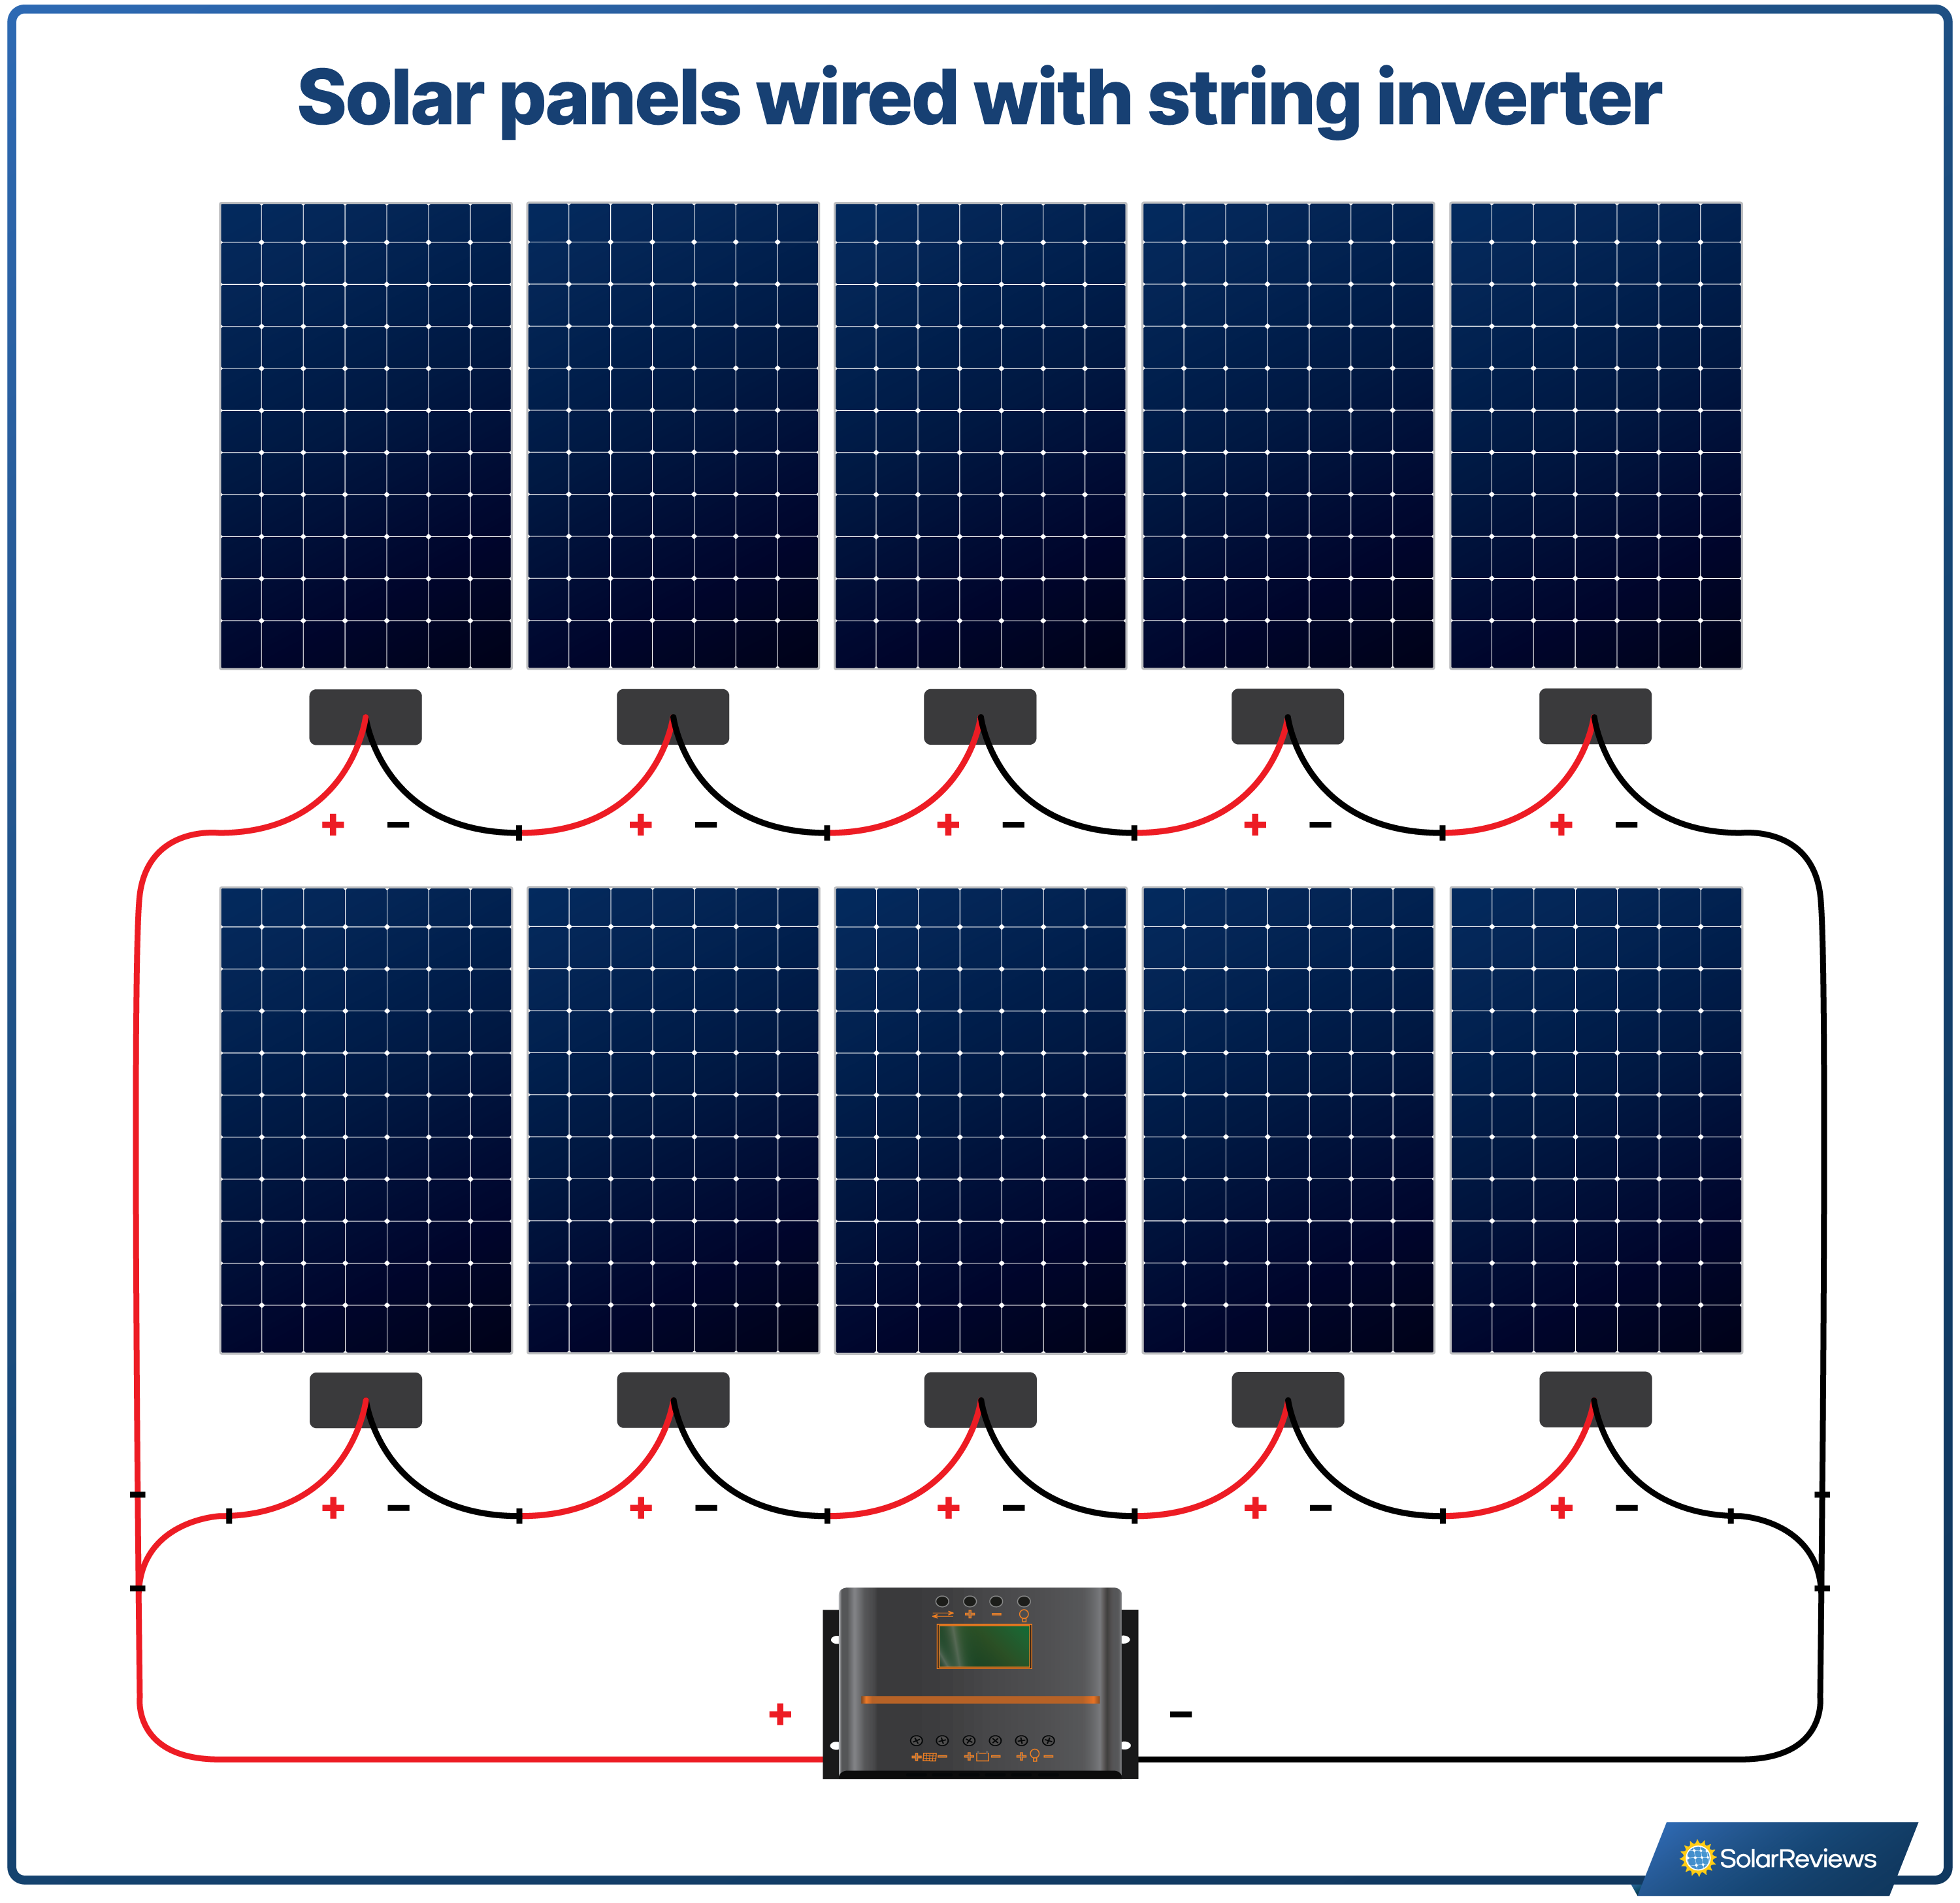 Solar panels can be wired in series and parallel to create a system that meets a home's needs.